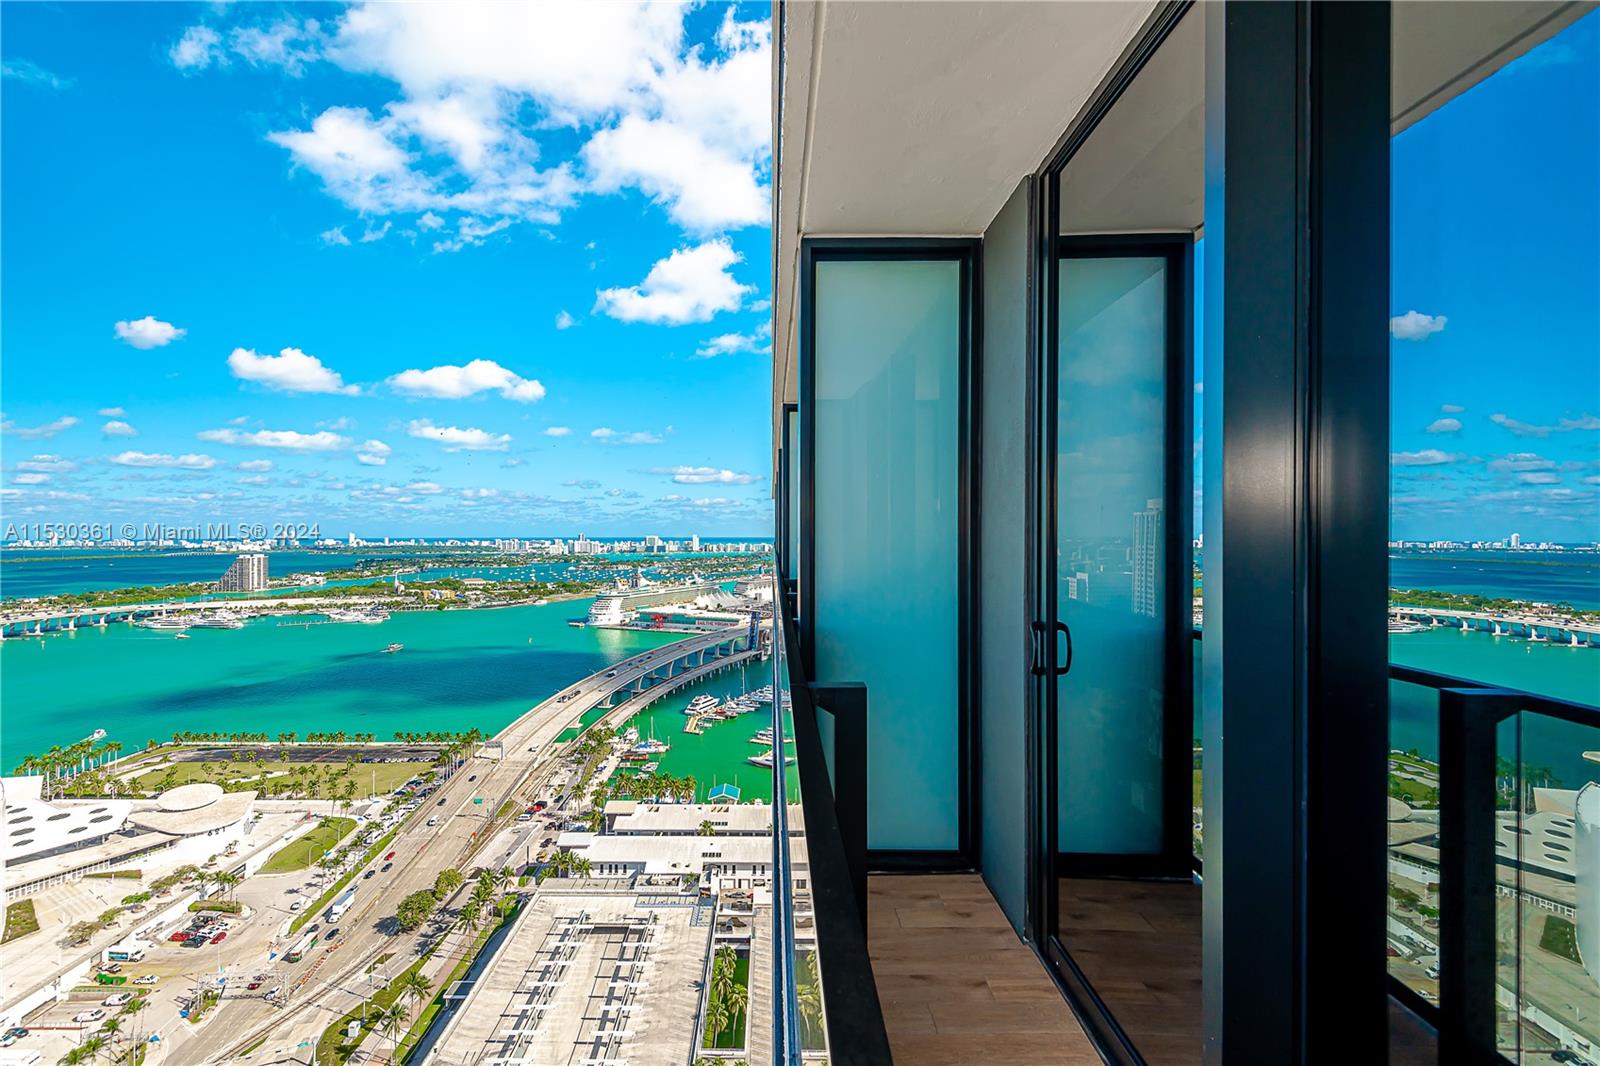 Experience luxury living with breathtaking views of Biscayne Bay and Downtown Miami in this brand new studio. Boasting high income potential and unrestricted rental opportunities, this fully furnished unit features a full kitchen, king-size bed, pull-out couch, washer and dryer, and a large flat-screen TV. Enjoy amenities such as a wraparound pool, two-story gym, valet parking, and more. Conveniently located near Kaseya Center, Bayside Marketplace, major roadways, the Port of Miami, Brightline train station, and public parks, this condo offers unparalleled convenience and comfort.